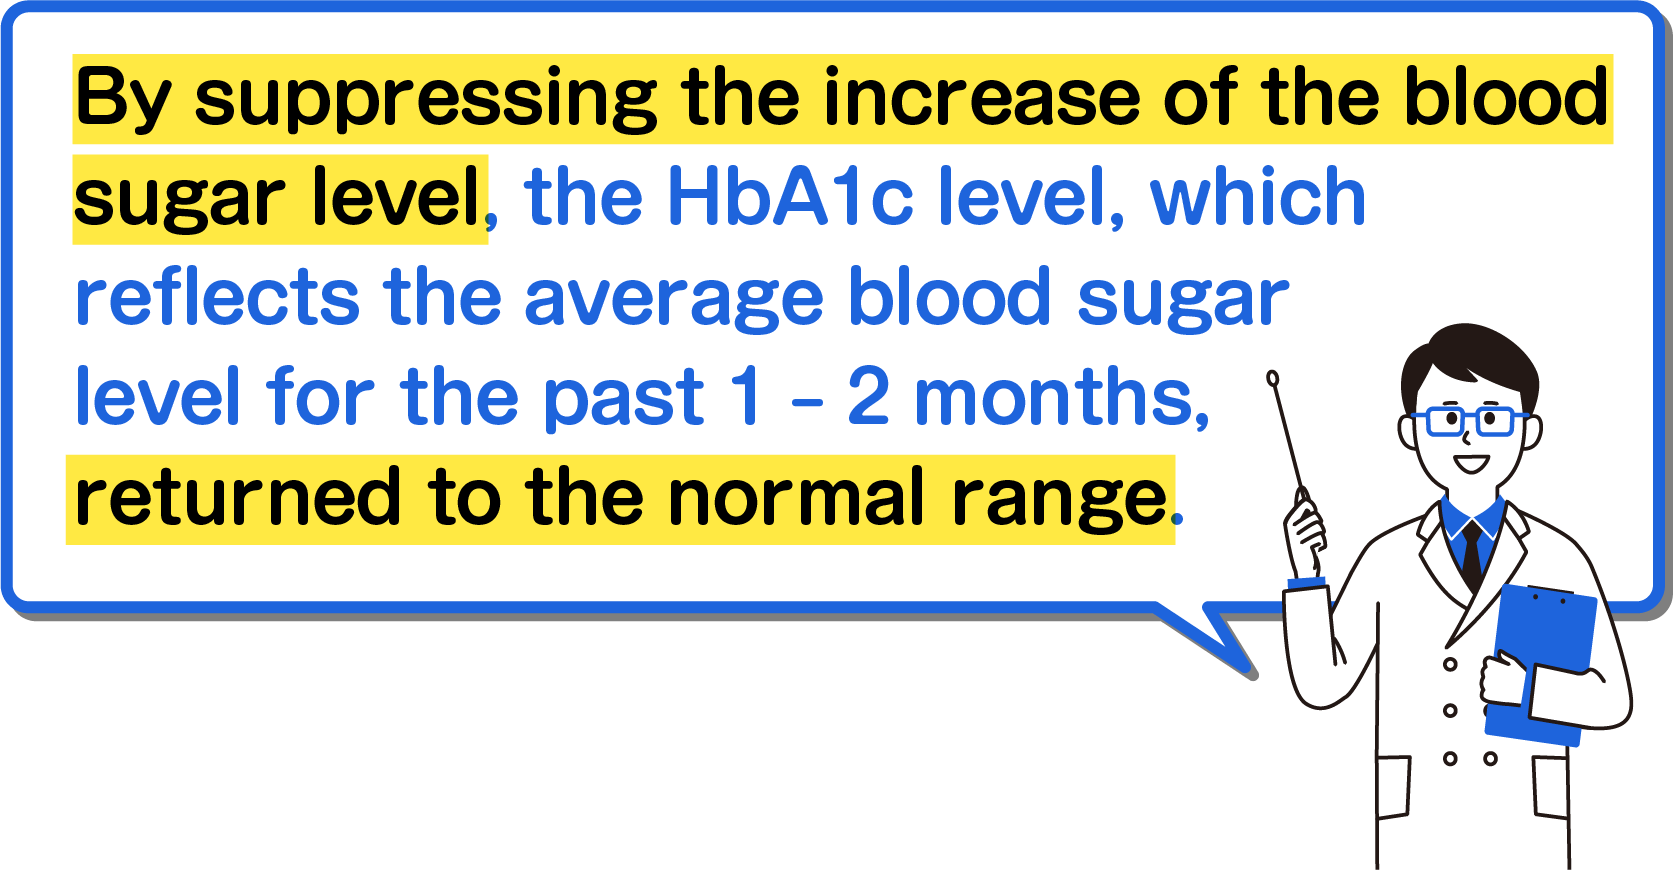 By suppressing the increase of the blood sugar level, the HbA1c level, which reflects the average blood sugar level for the past 1 – 2 months, returned to the normal range.